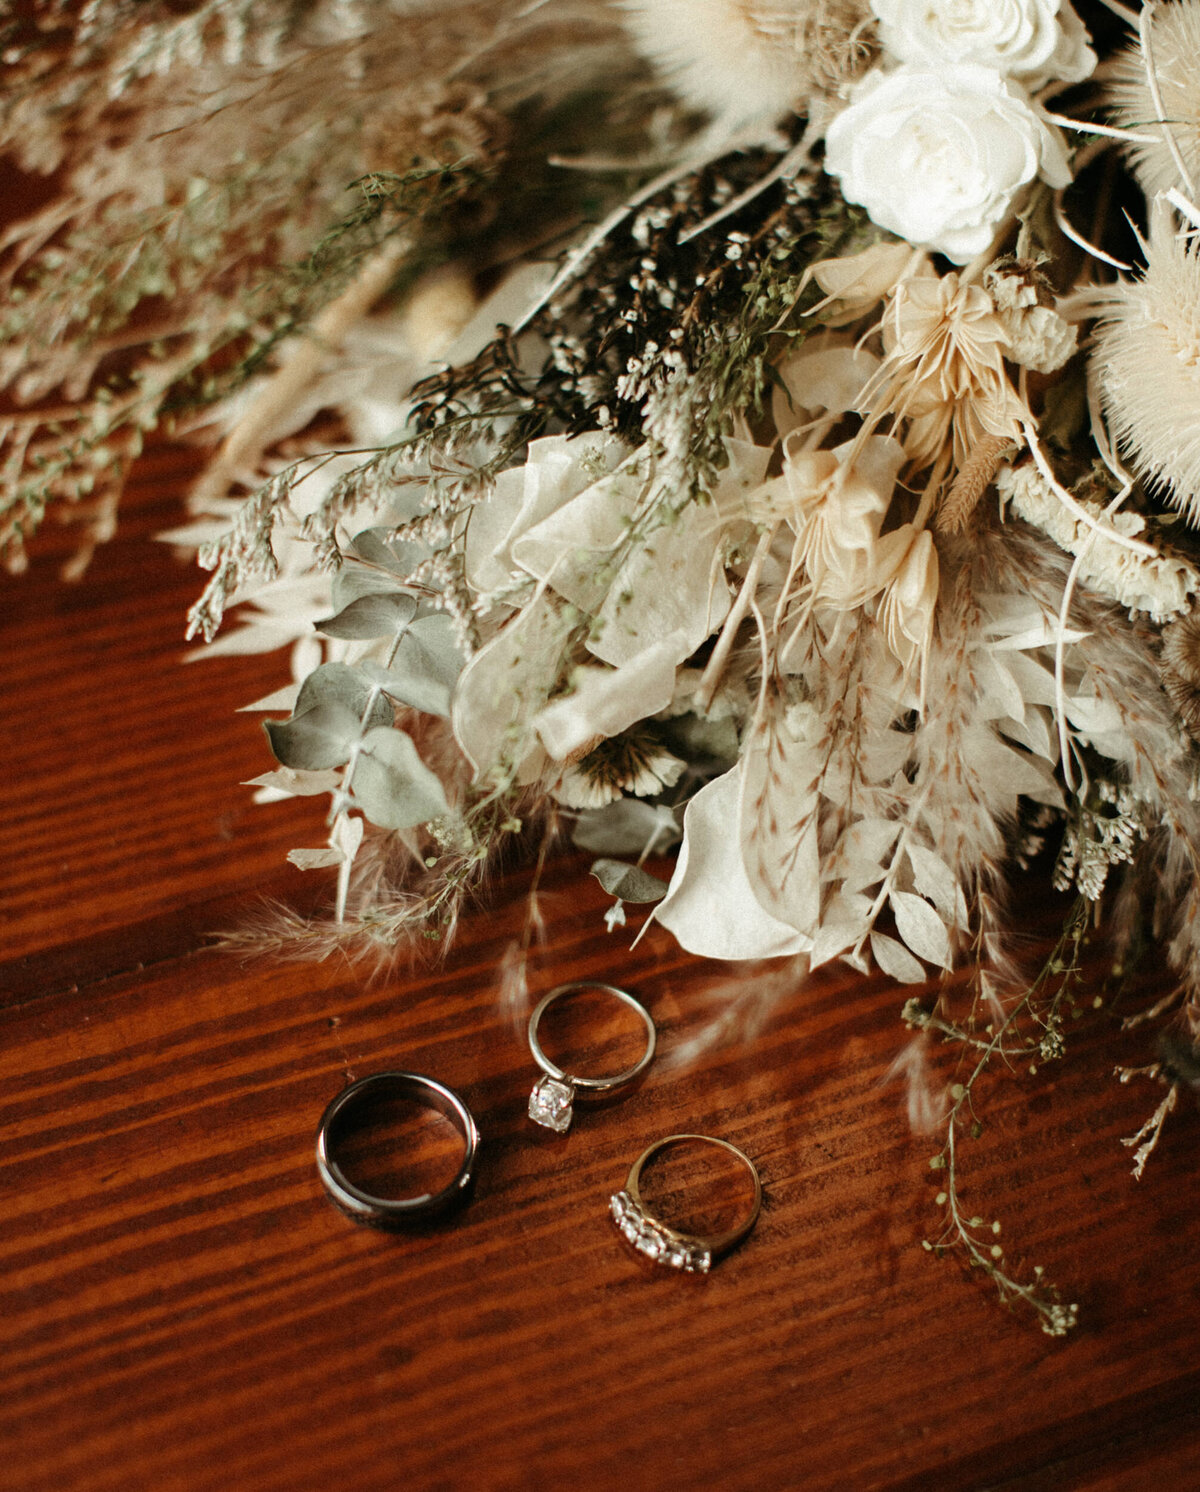 Wedding details of bands and engagement ring laying next to dried floral bouquet